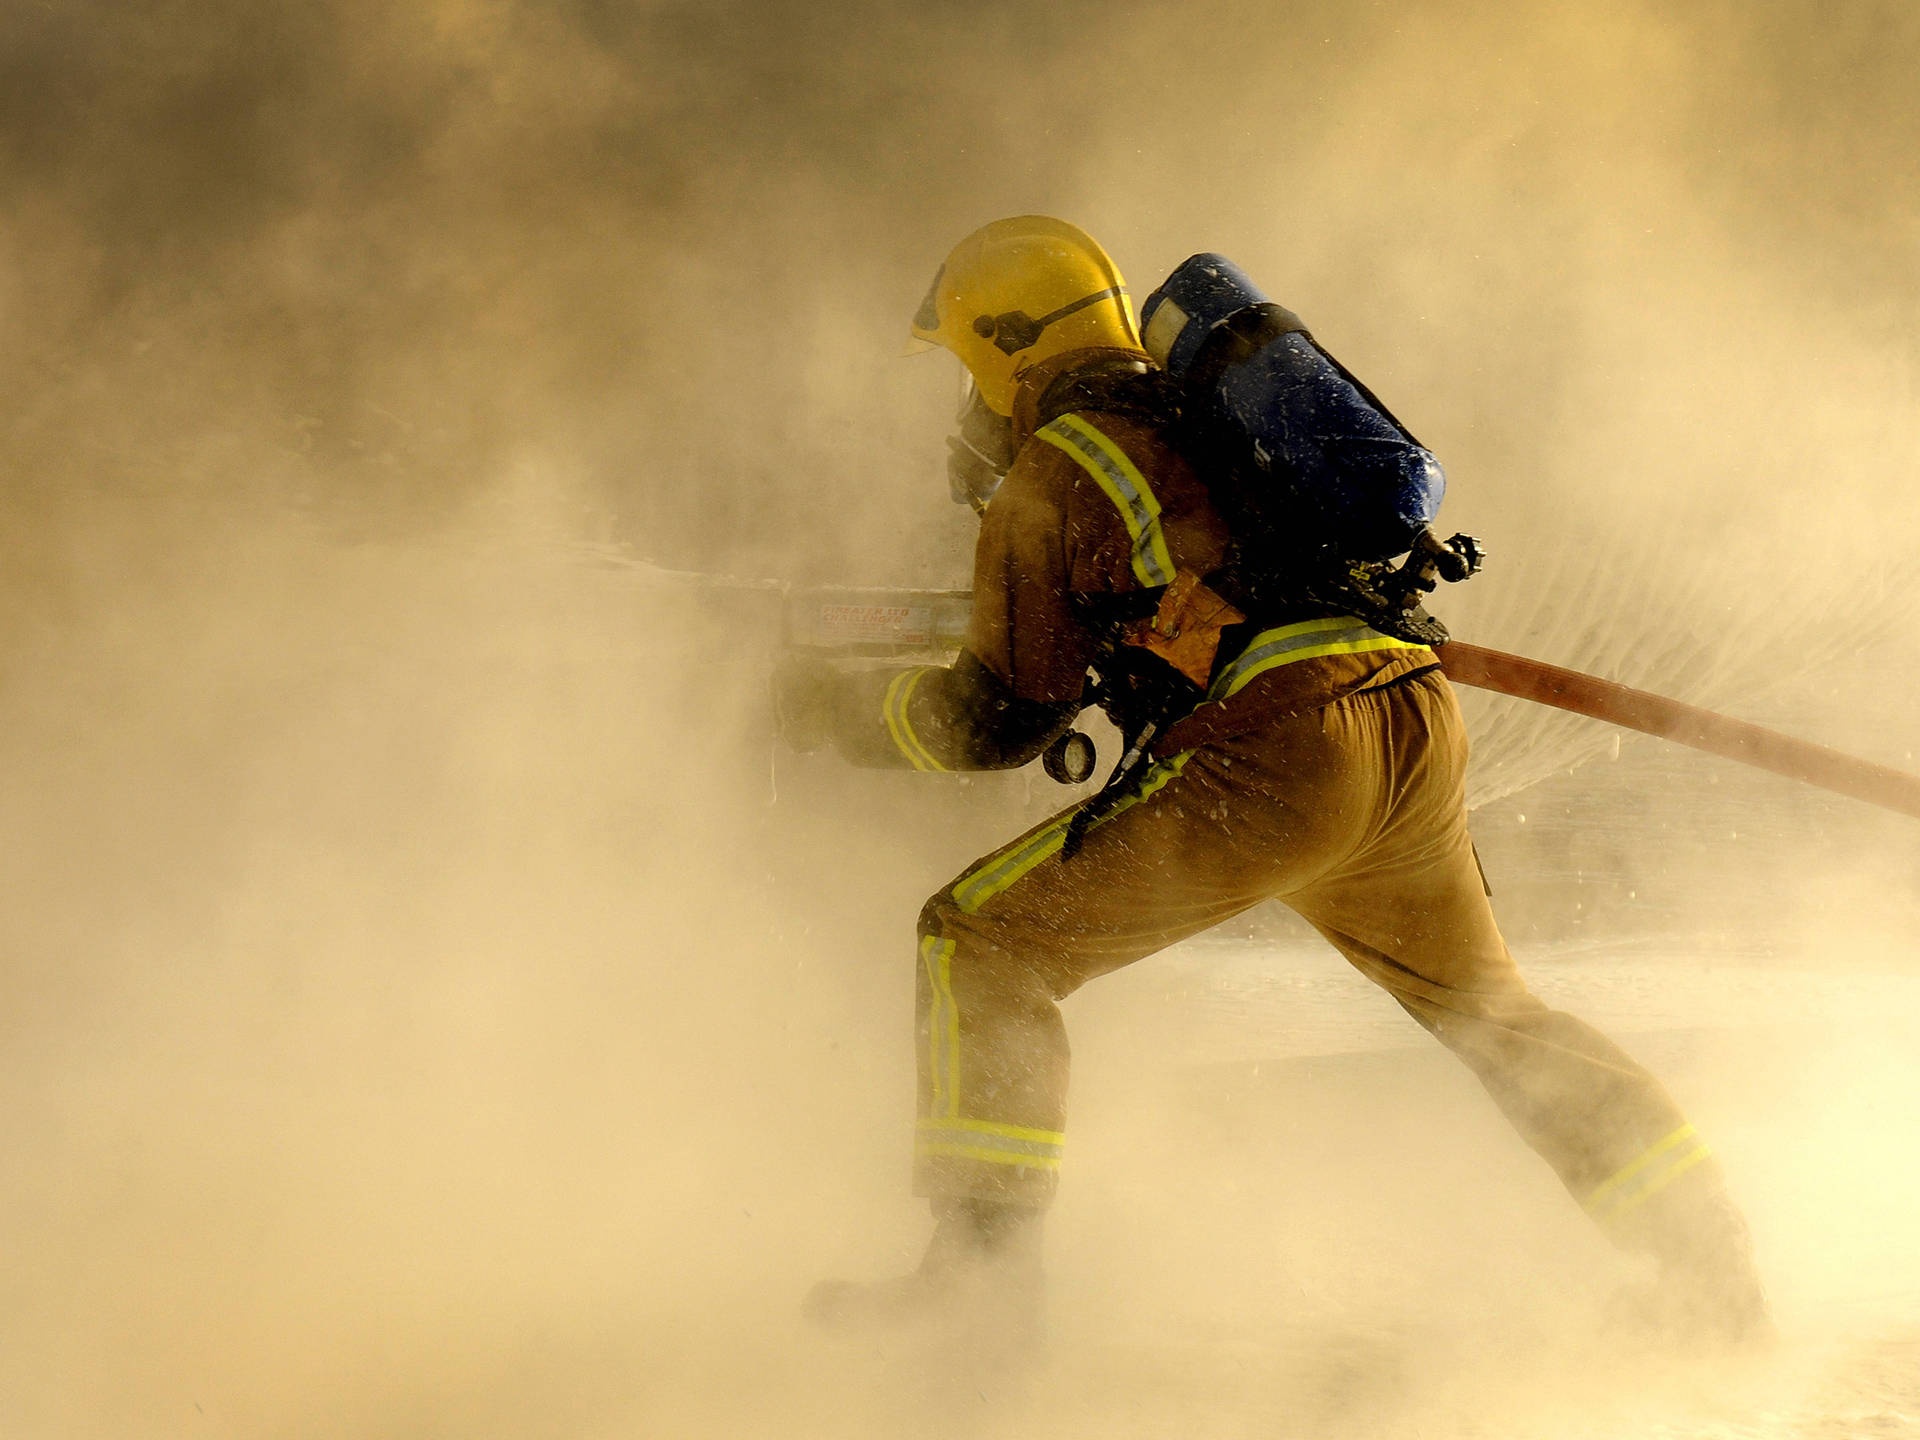 Firefighter In Smoky Operation Wallpaper